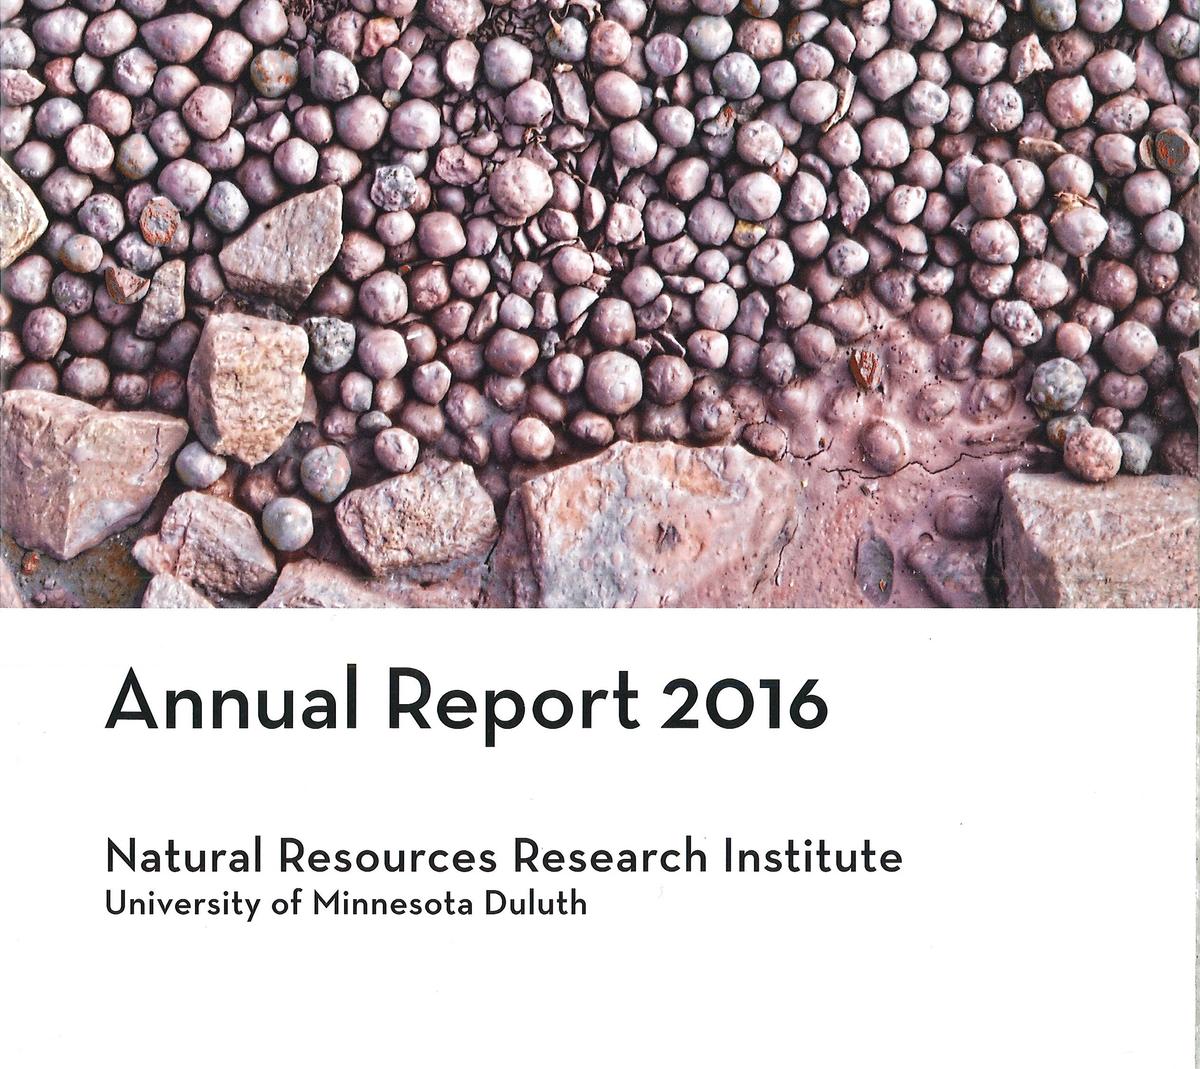 Image of annual report with taconite pellets on cover.